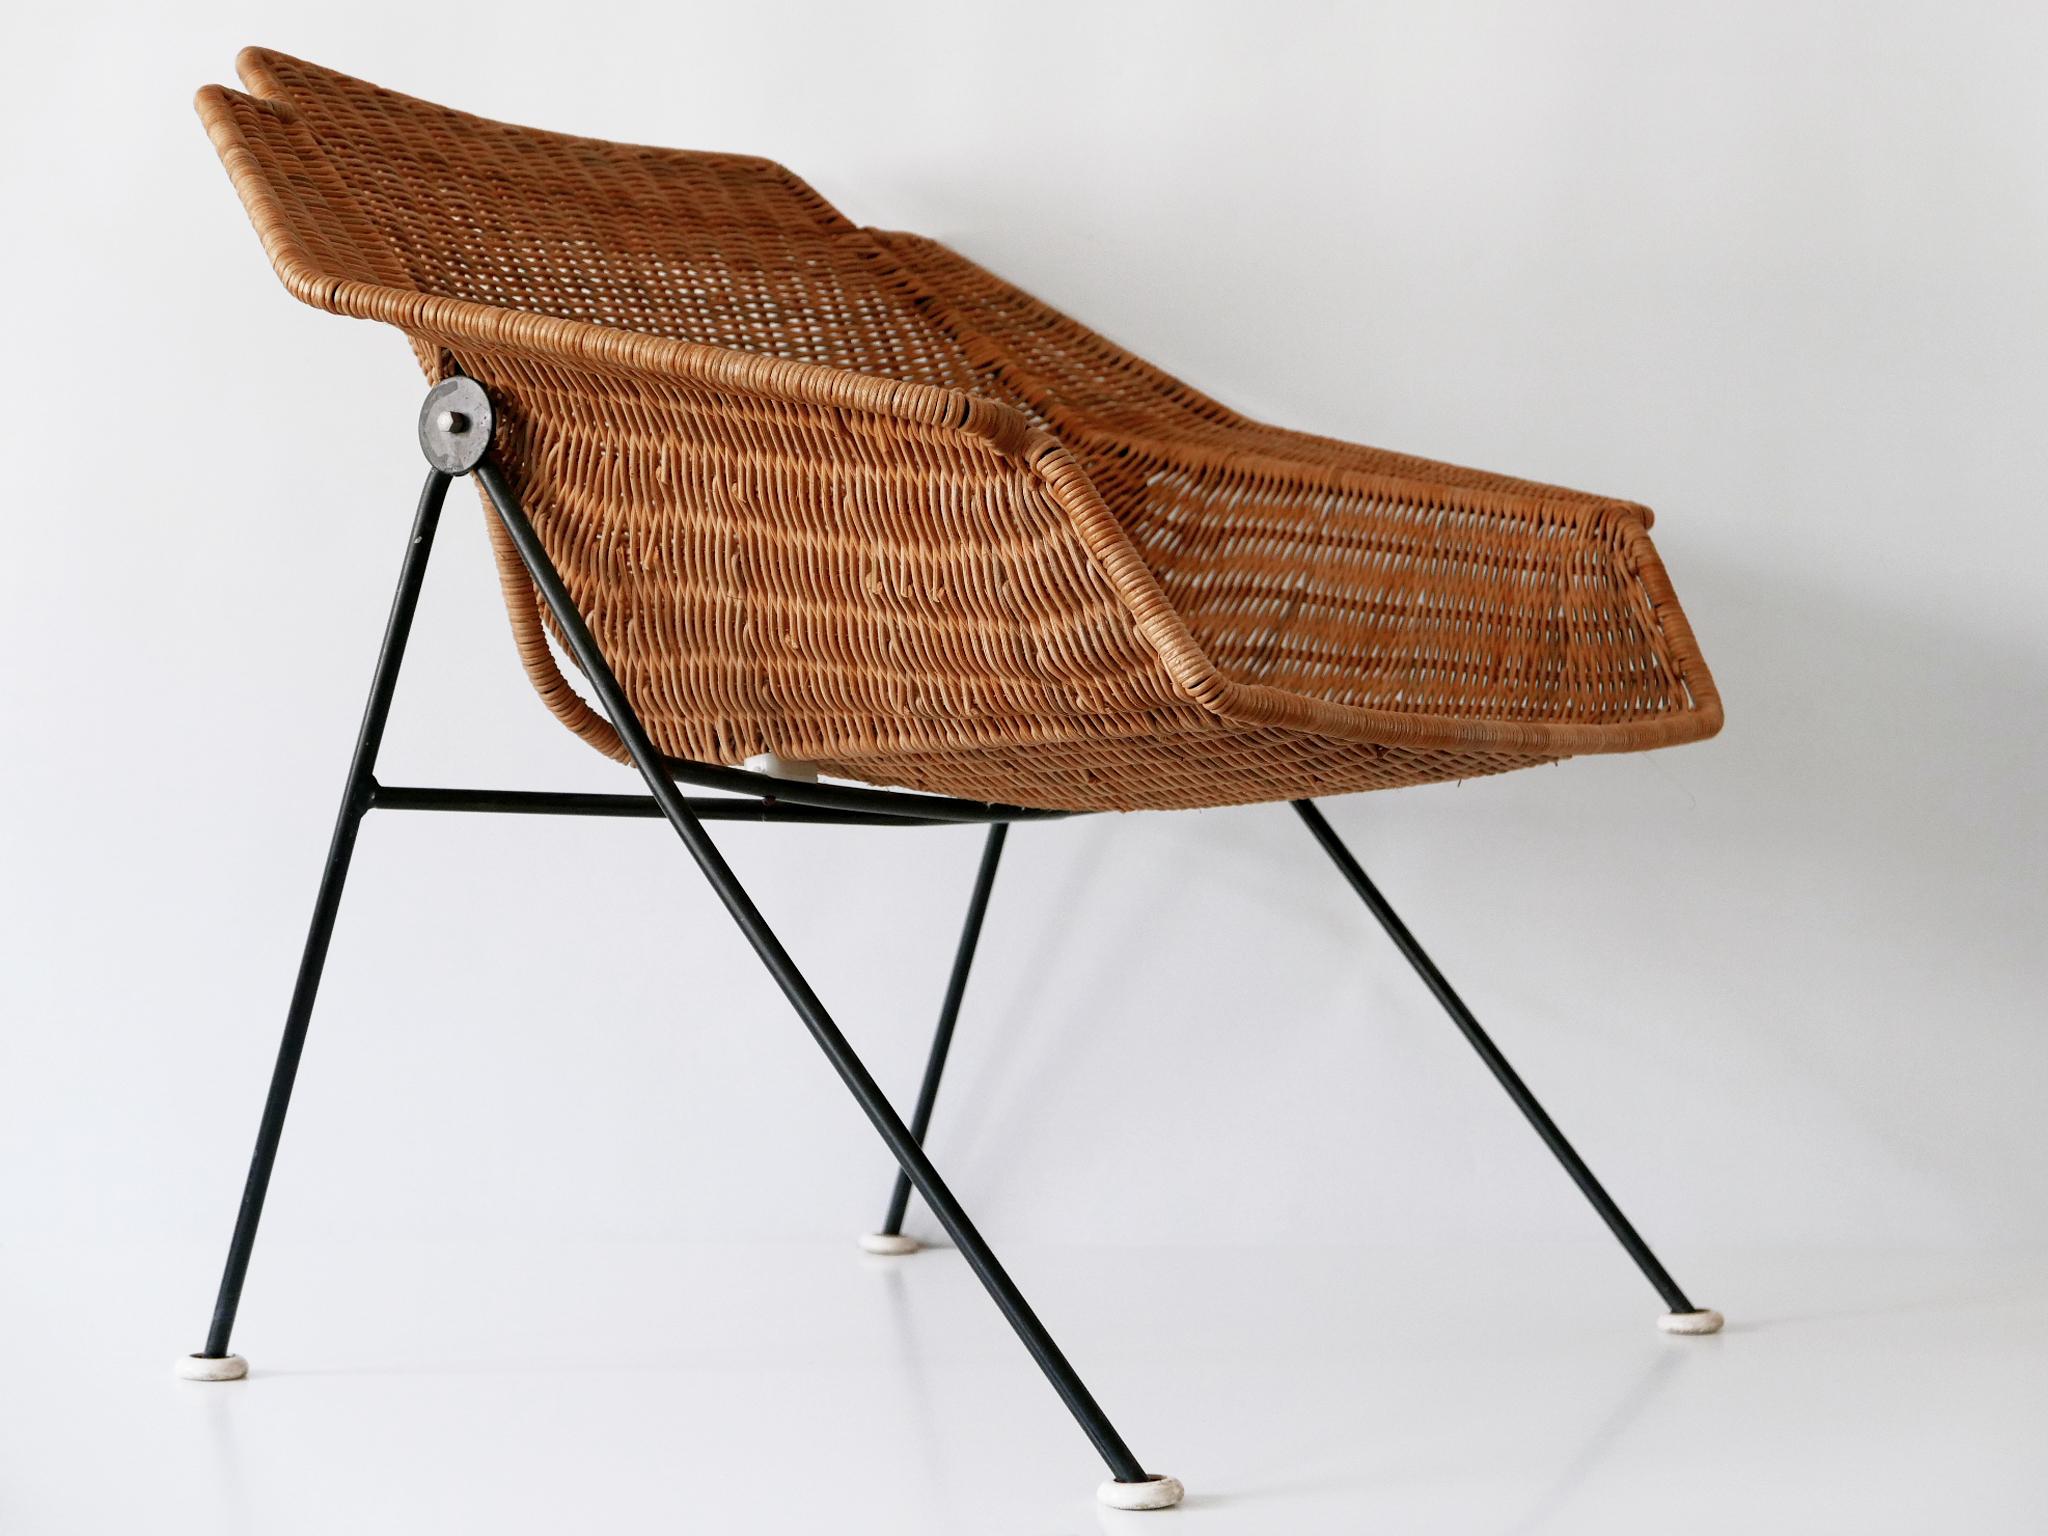 Exceptional Mid-Century Modern Wicker Lounge Chair or Armchair 1950s Sweden For Sale 6